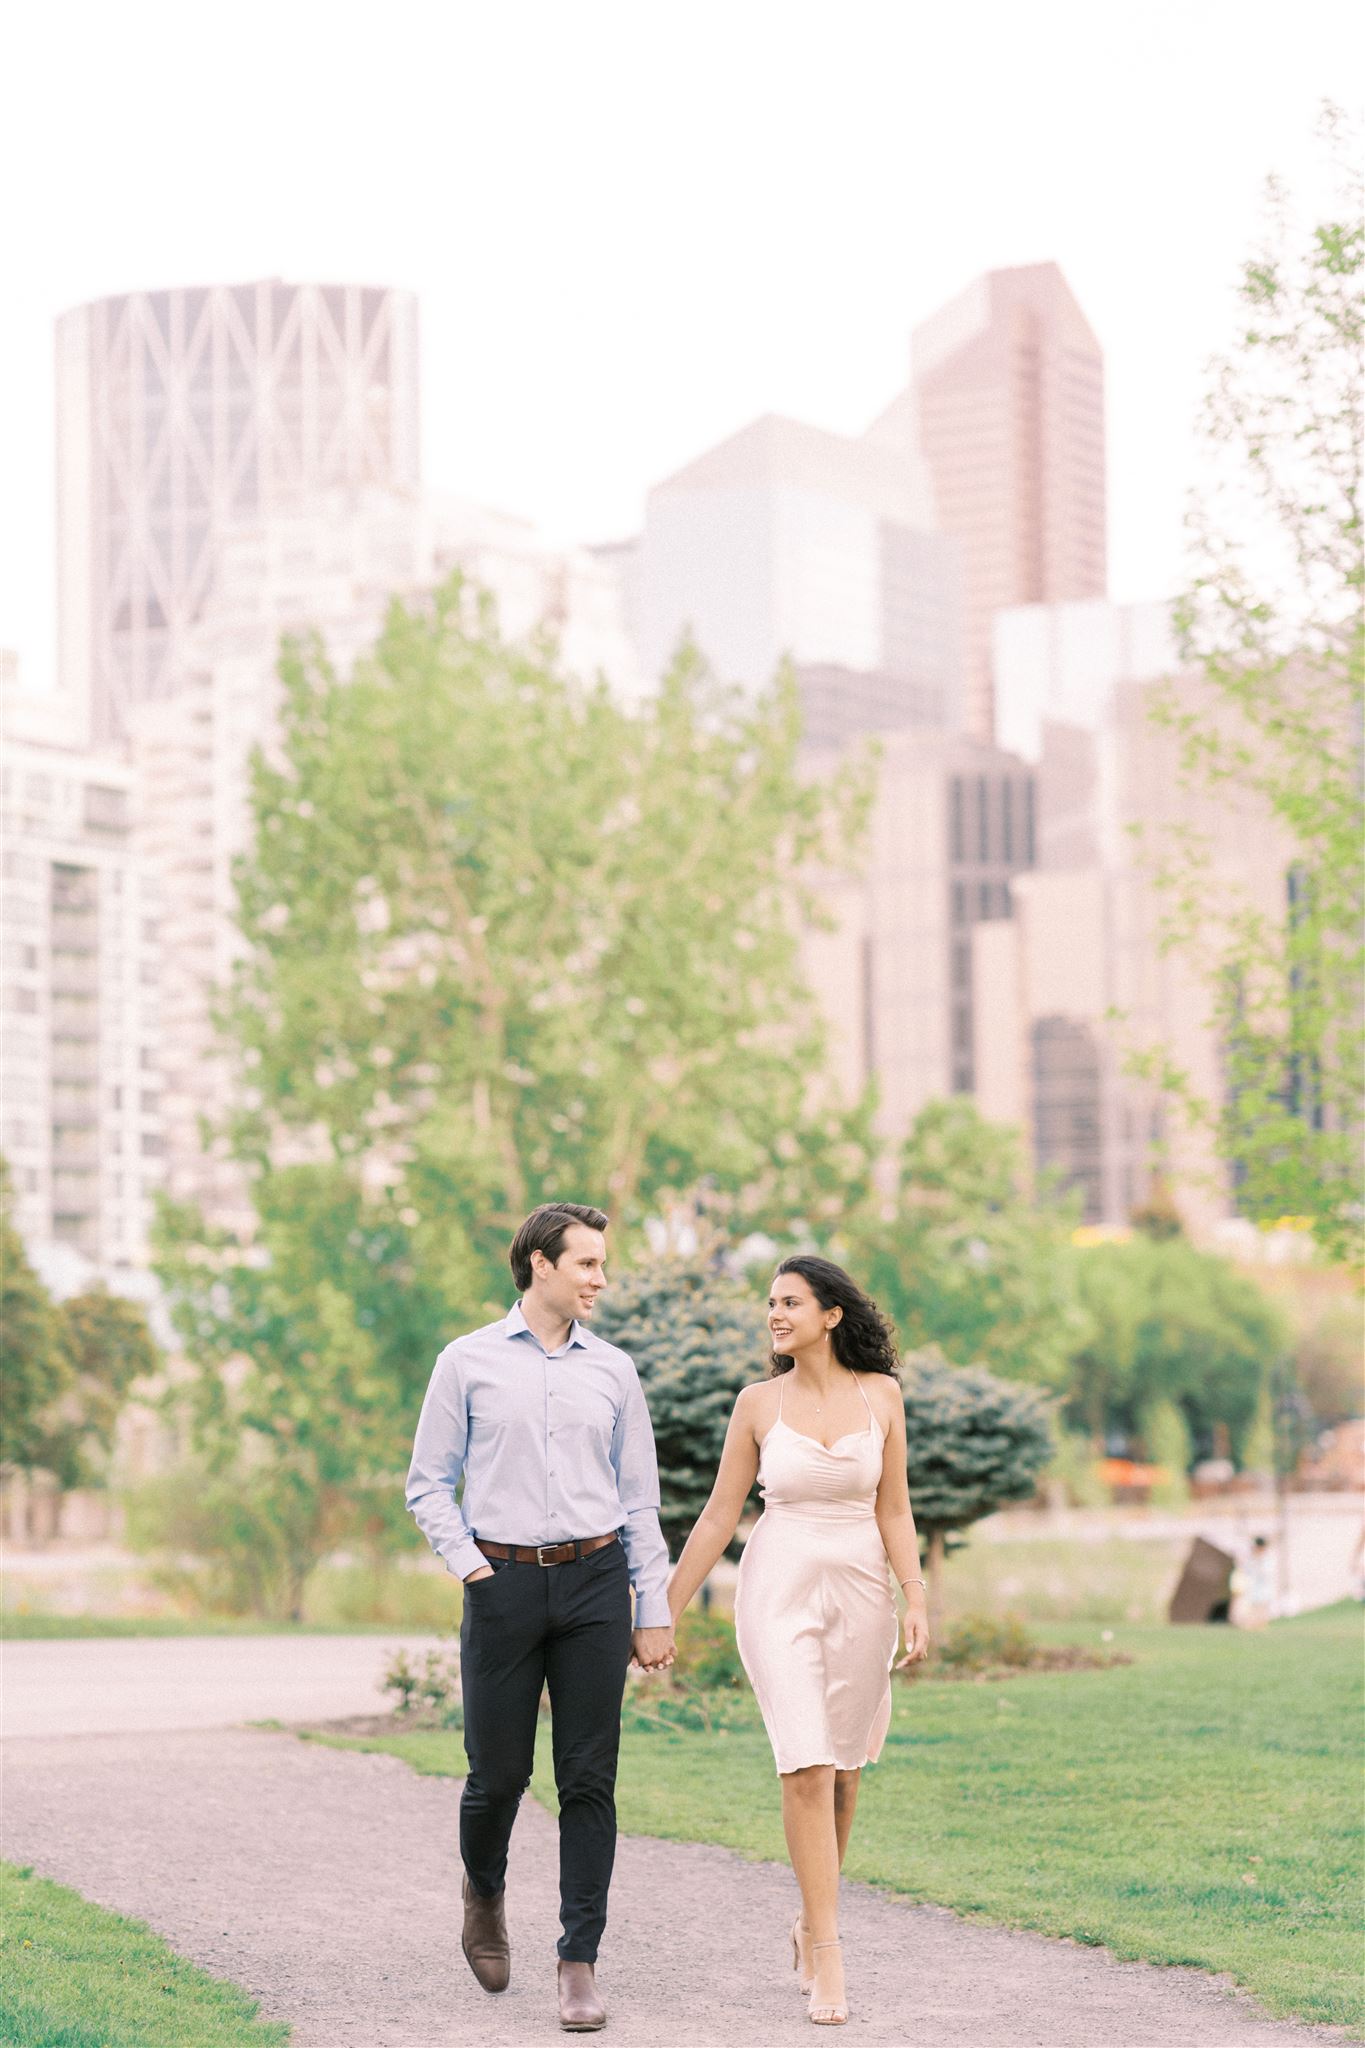 Relaxed Sunset Engagement Downtown Calgary, Cherry blossom engagement photos, cherry blossoms, couple walking downtown, cityscape engagement, couple embracing engagement, nicole sarah